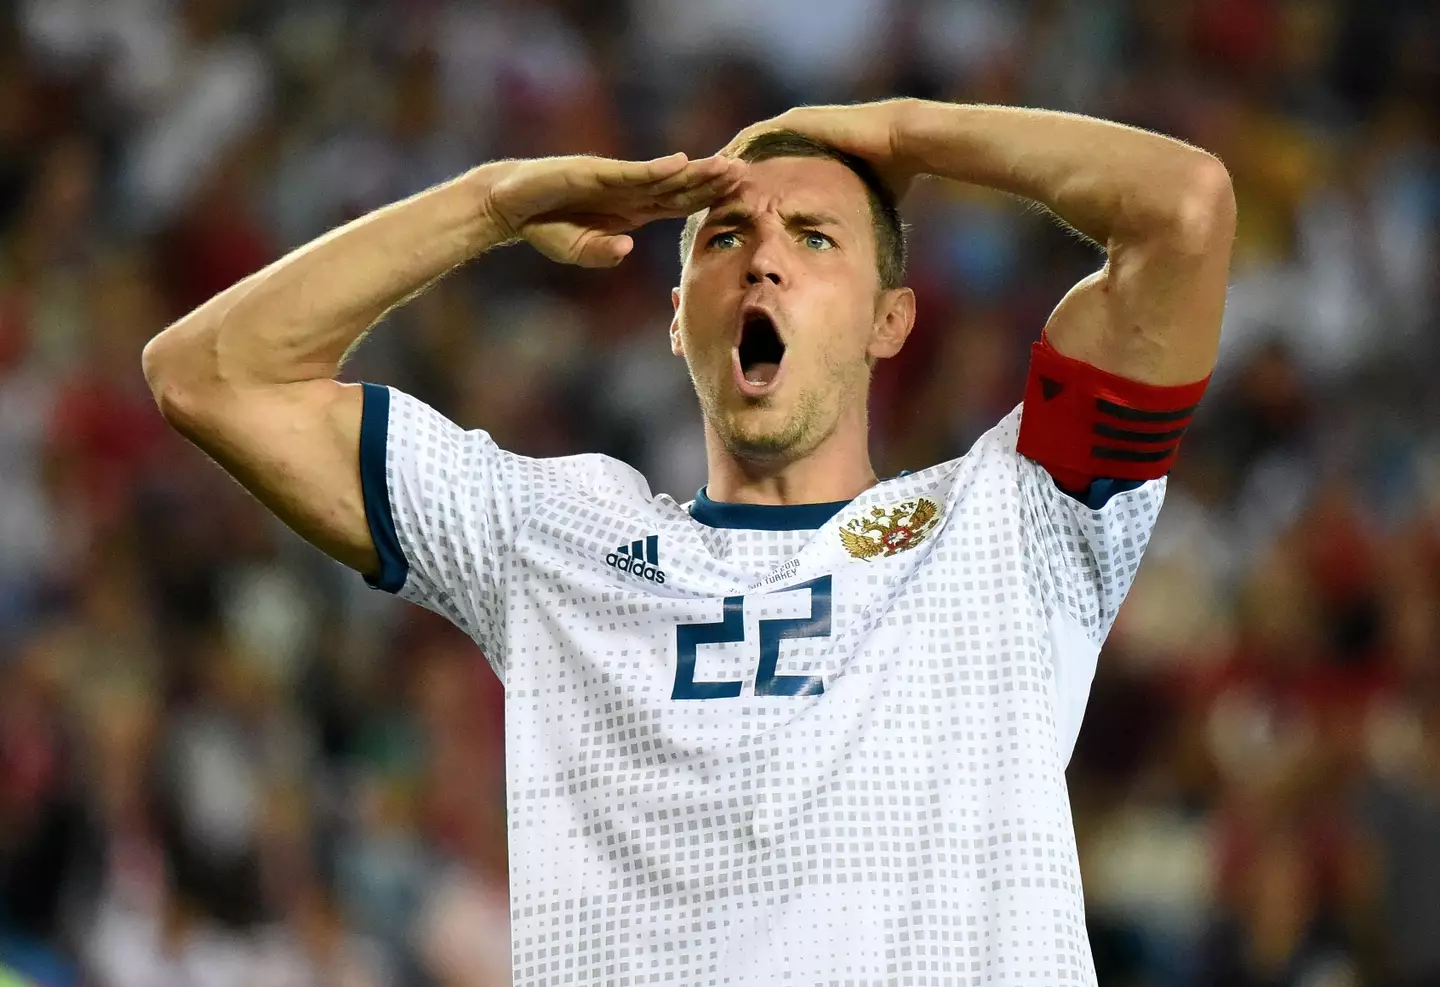 Dzyuba says he opposes war but has called for politics to be separated from sport (Image: PA)